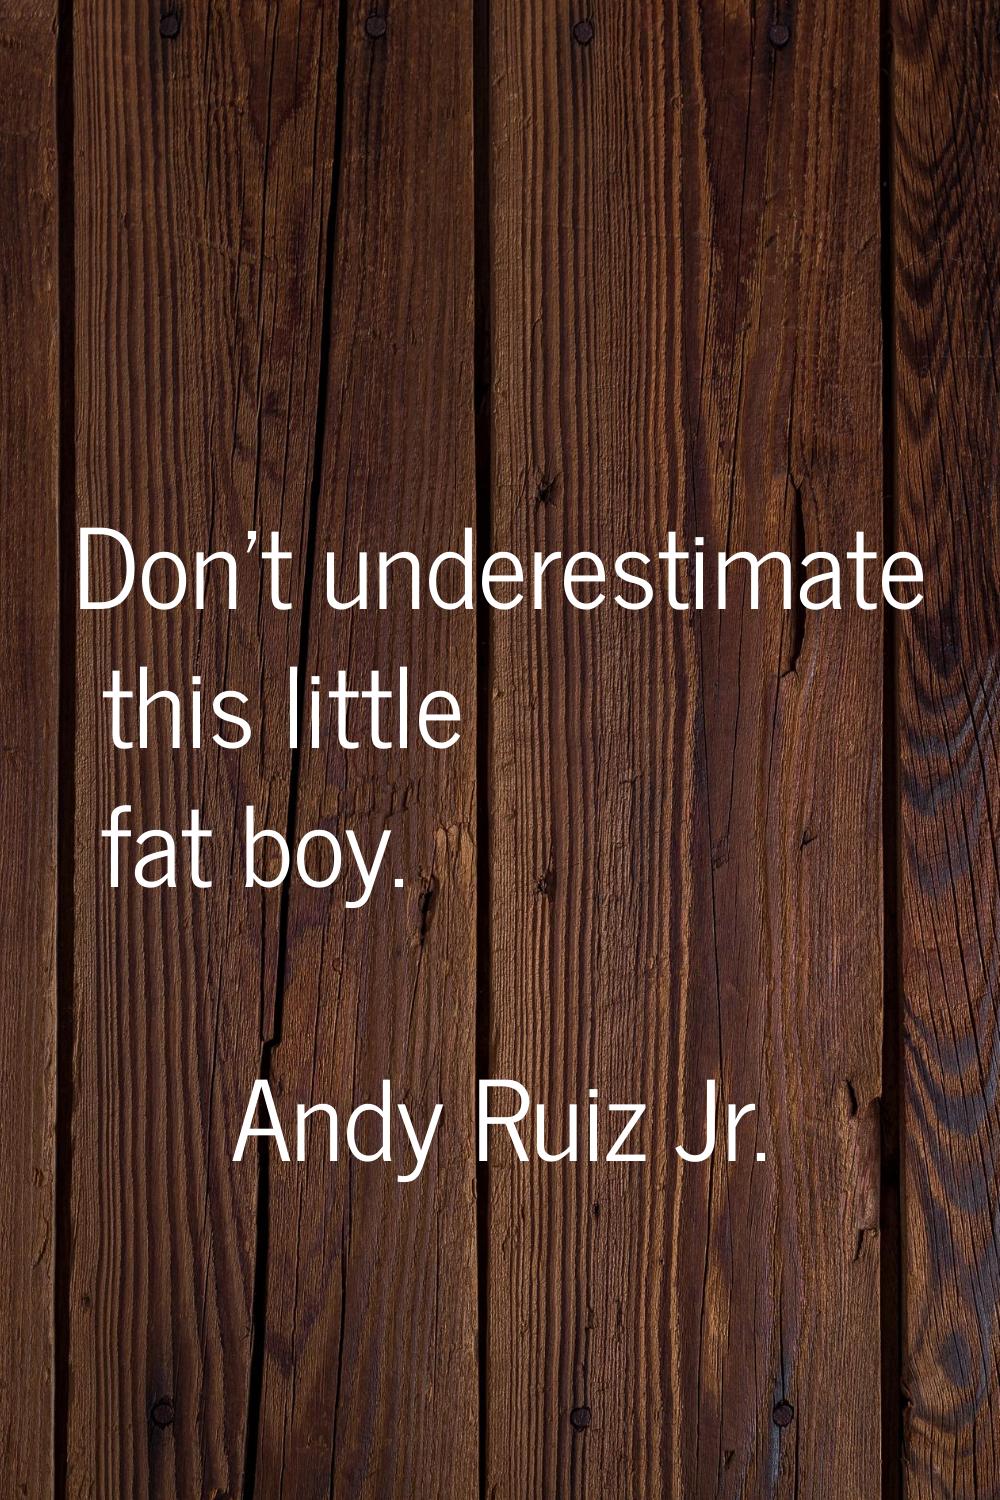 Don't underestimate this little fat boy.